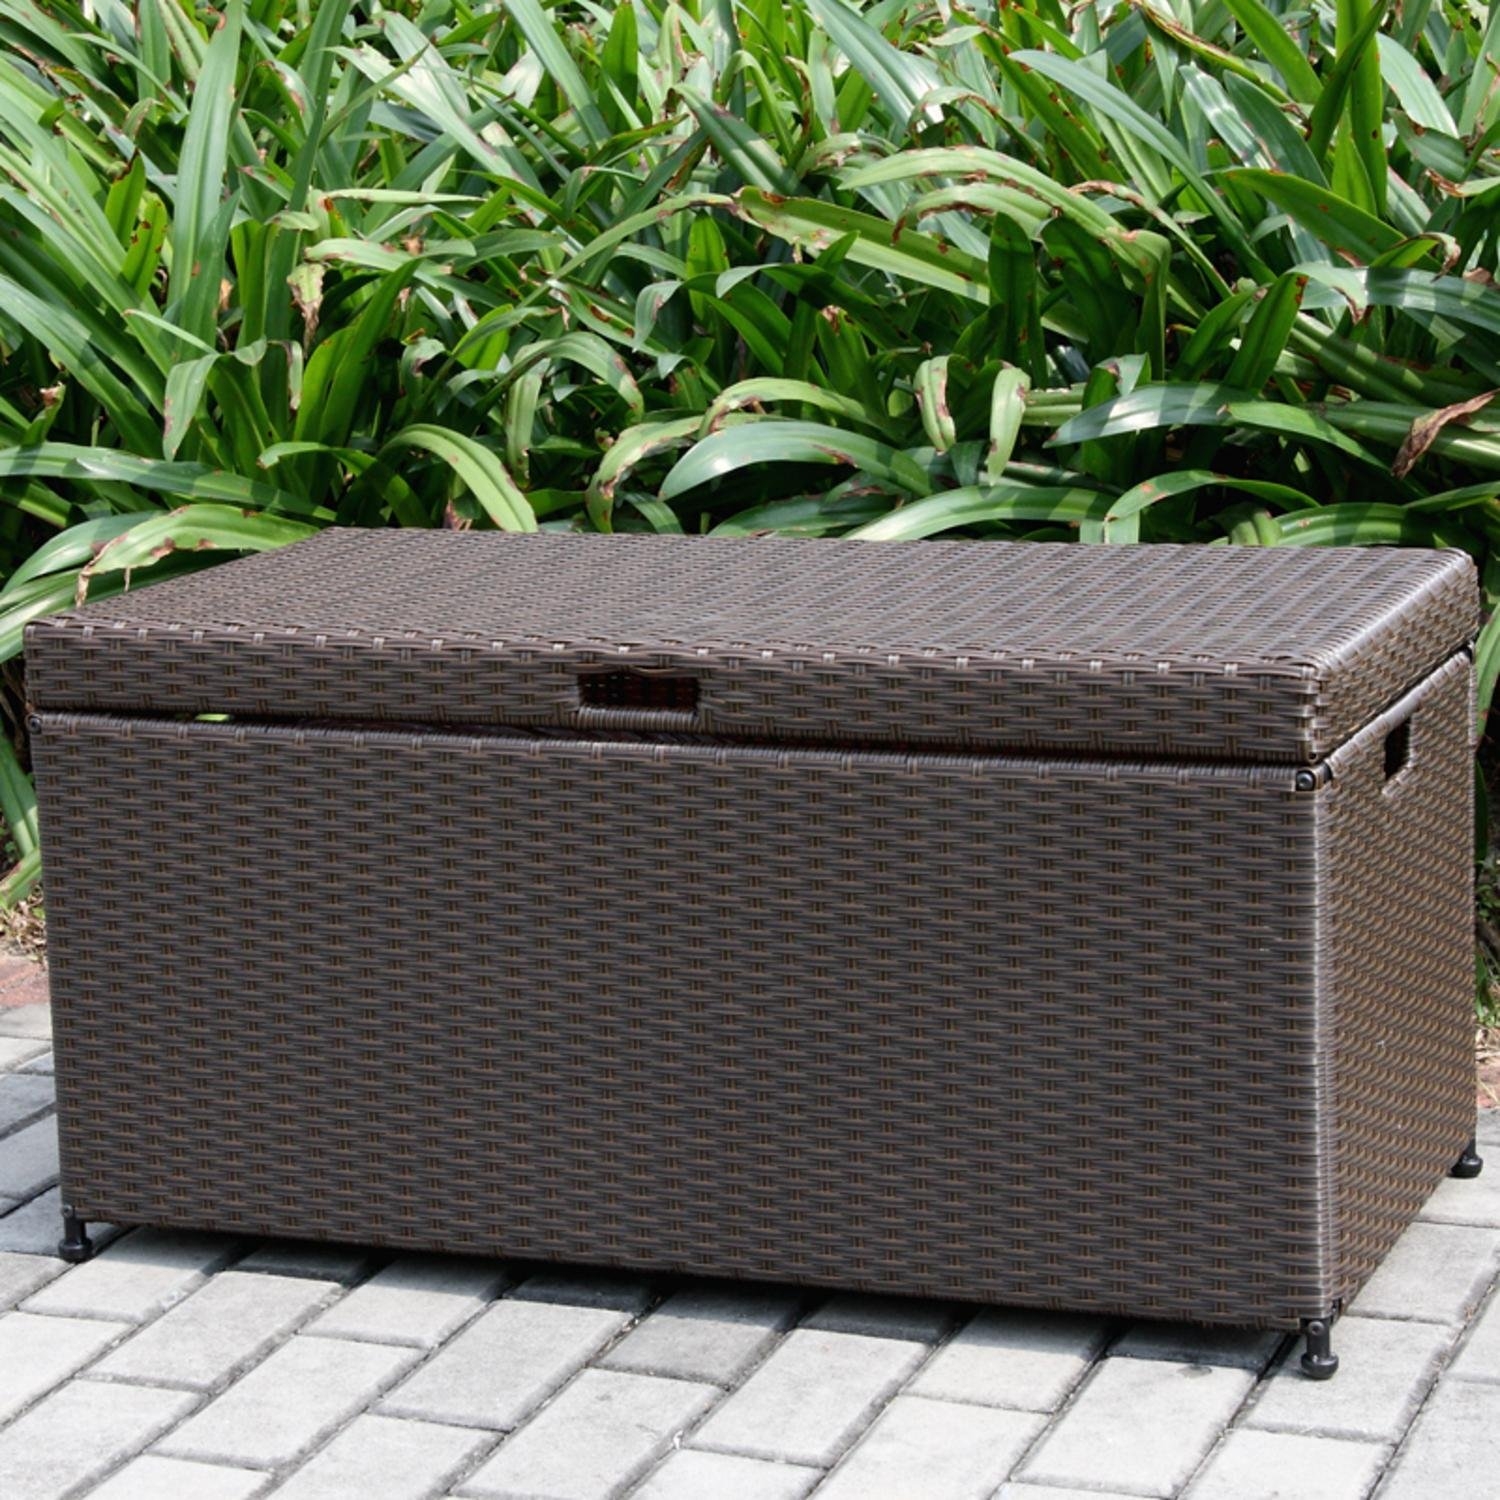 Black Blaker 134 Gallon Wicker Storage Deck Box Patio Storage Box Cushions Not Included Recommended to Keep It Indoor When Not in Use Storage Deck Box Patio Storage Box 